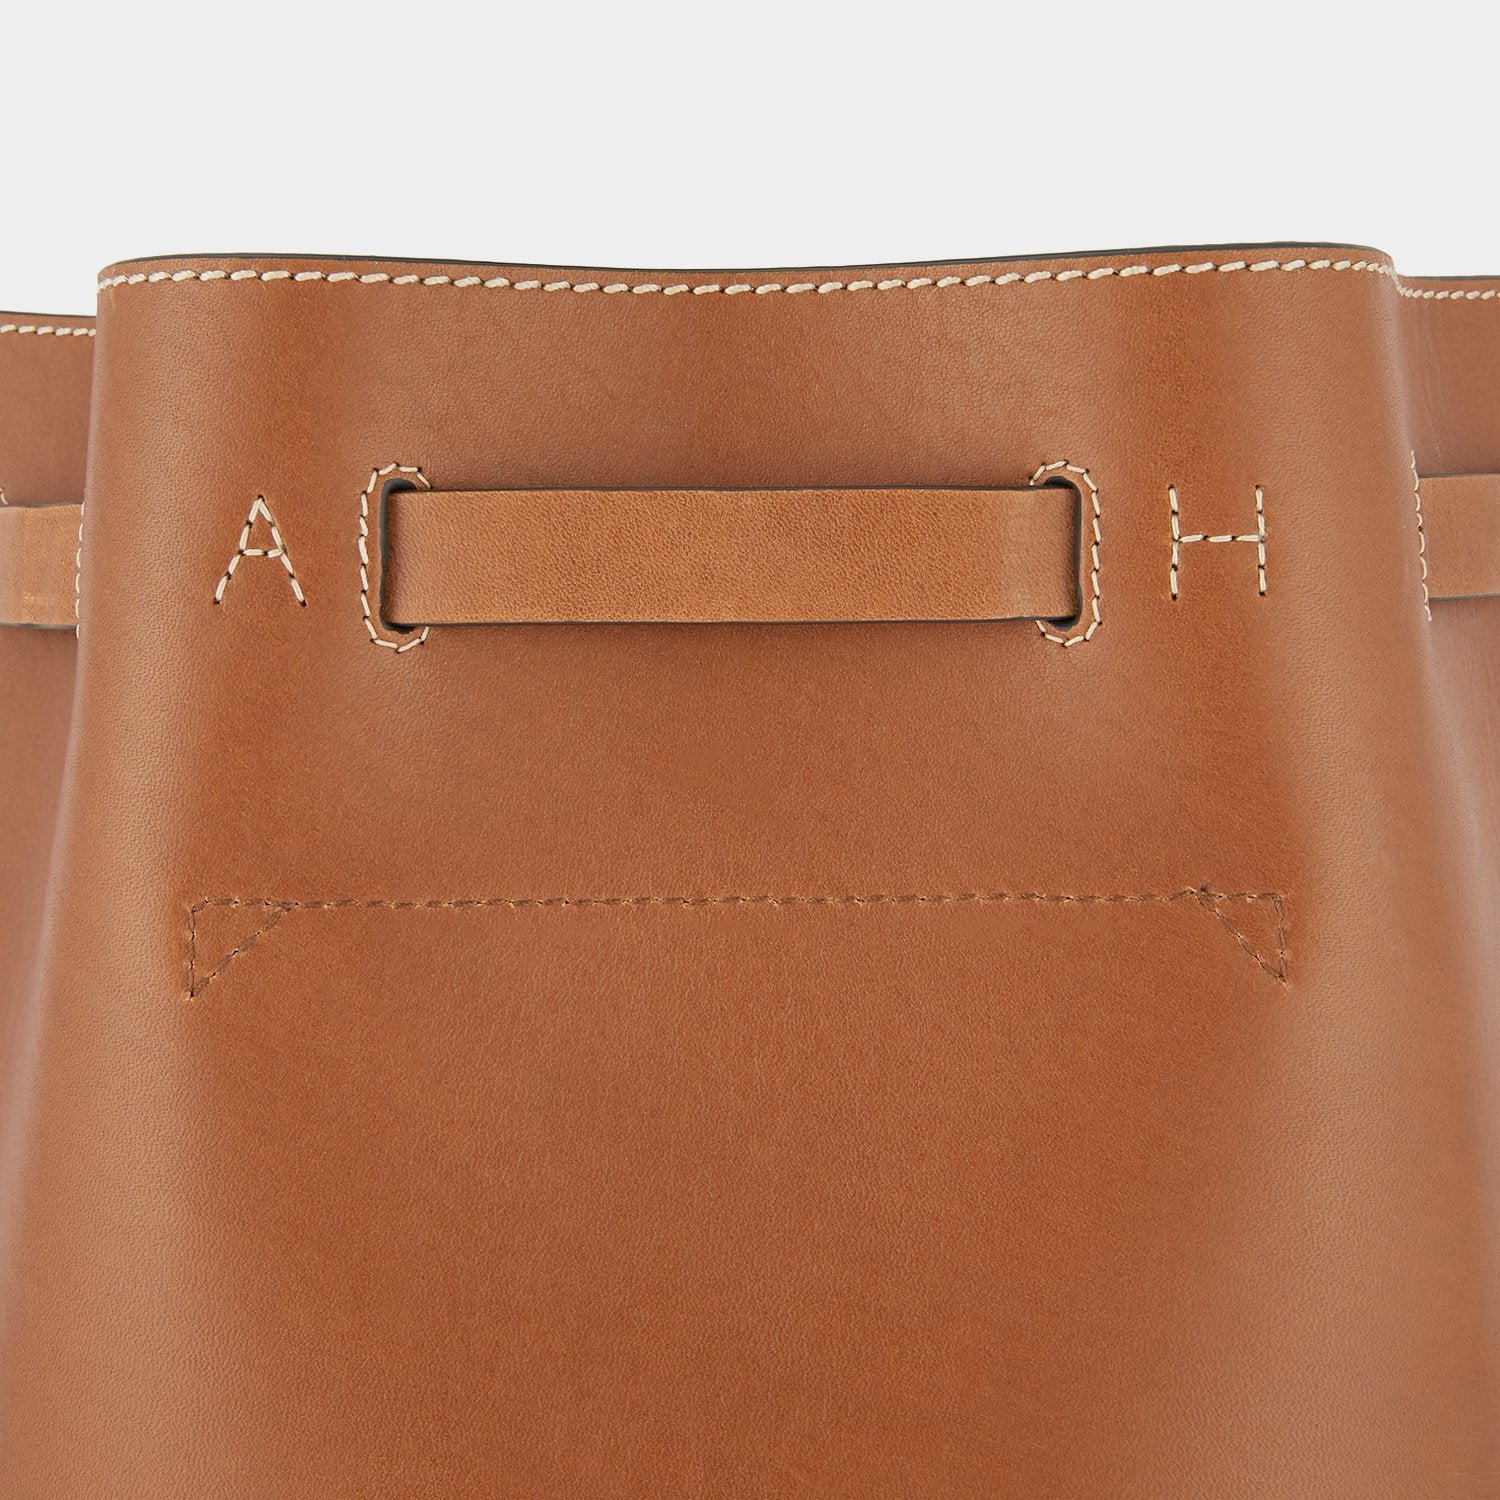 「Return to Nature」バケットバッグ -

                  
                    Compostable Leather in Tan -
                  

                  Anya Hindmarch JP
